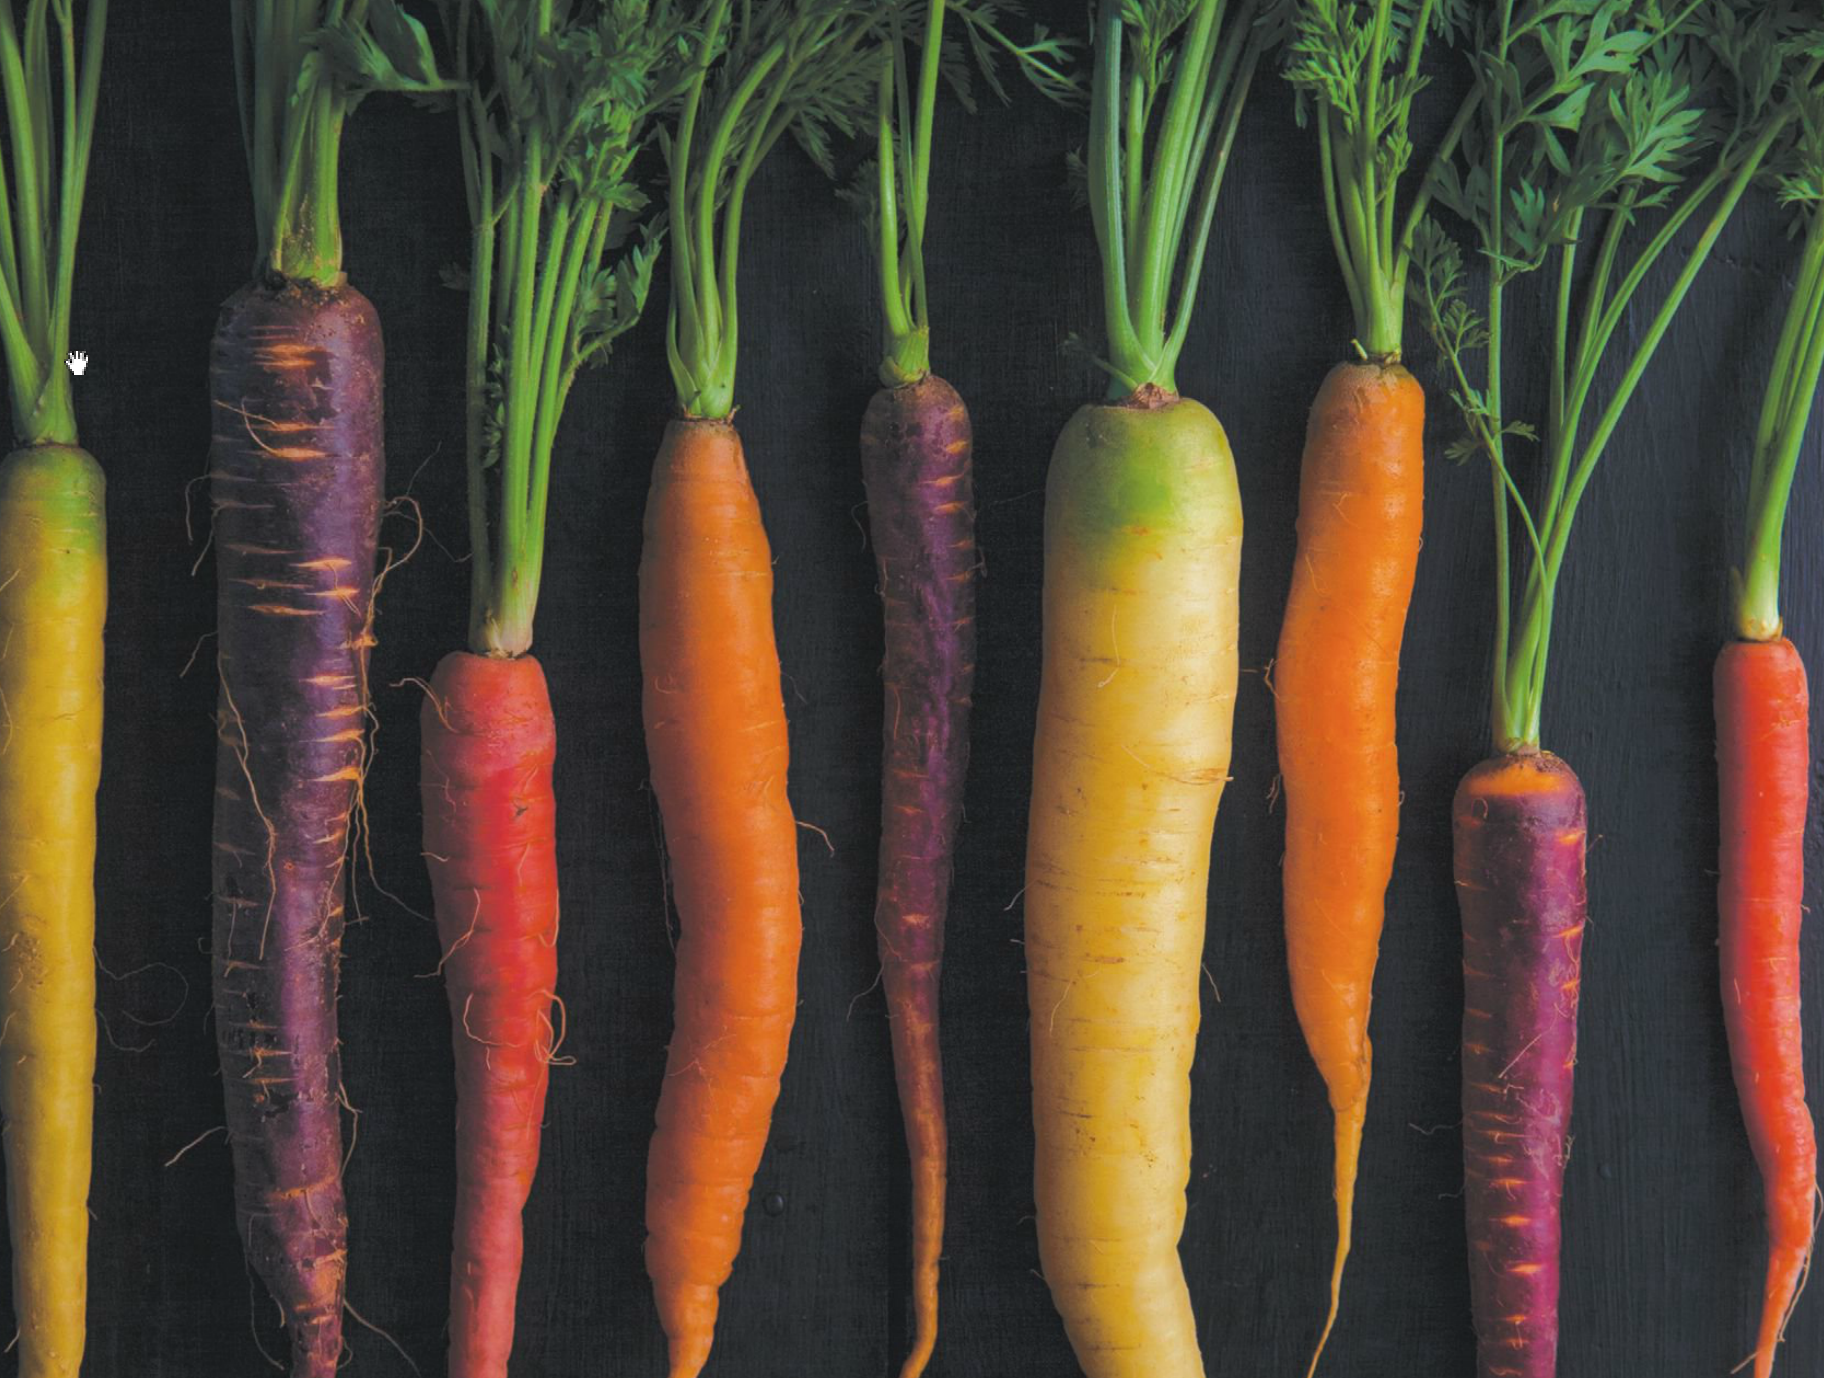 Carrots in all colors